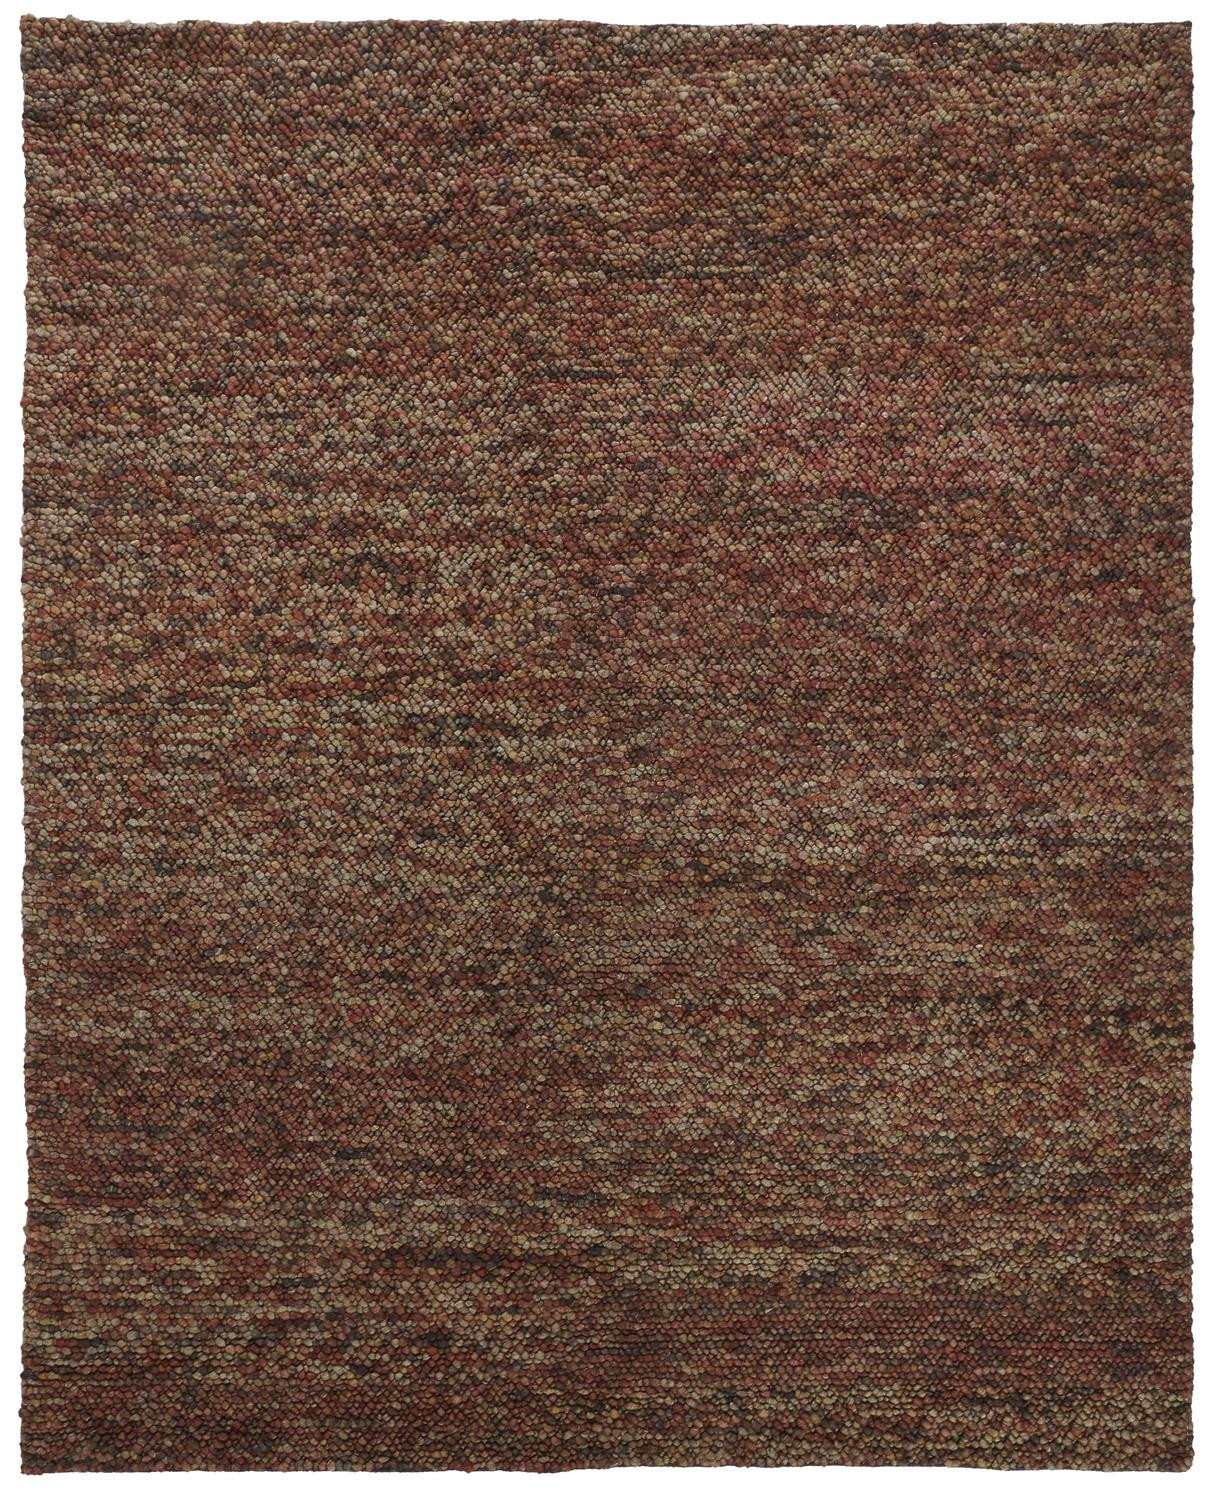 2' X 3' Brown Orange And Red Wool Hand Woven Distressed Stain Resistant Area Rug-515291-1